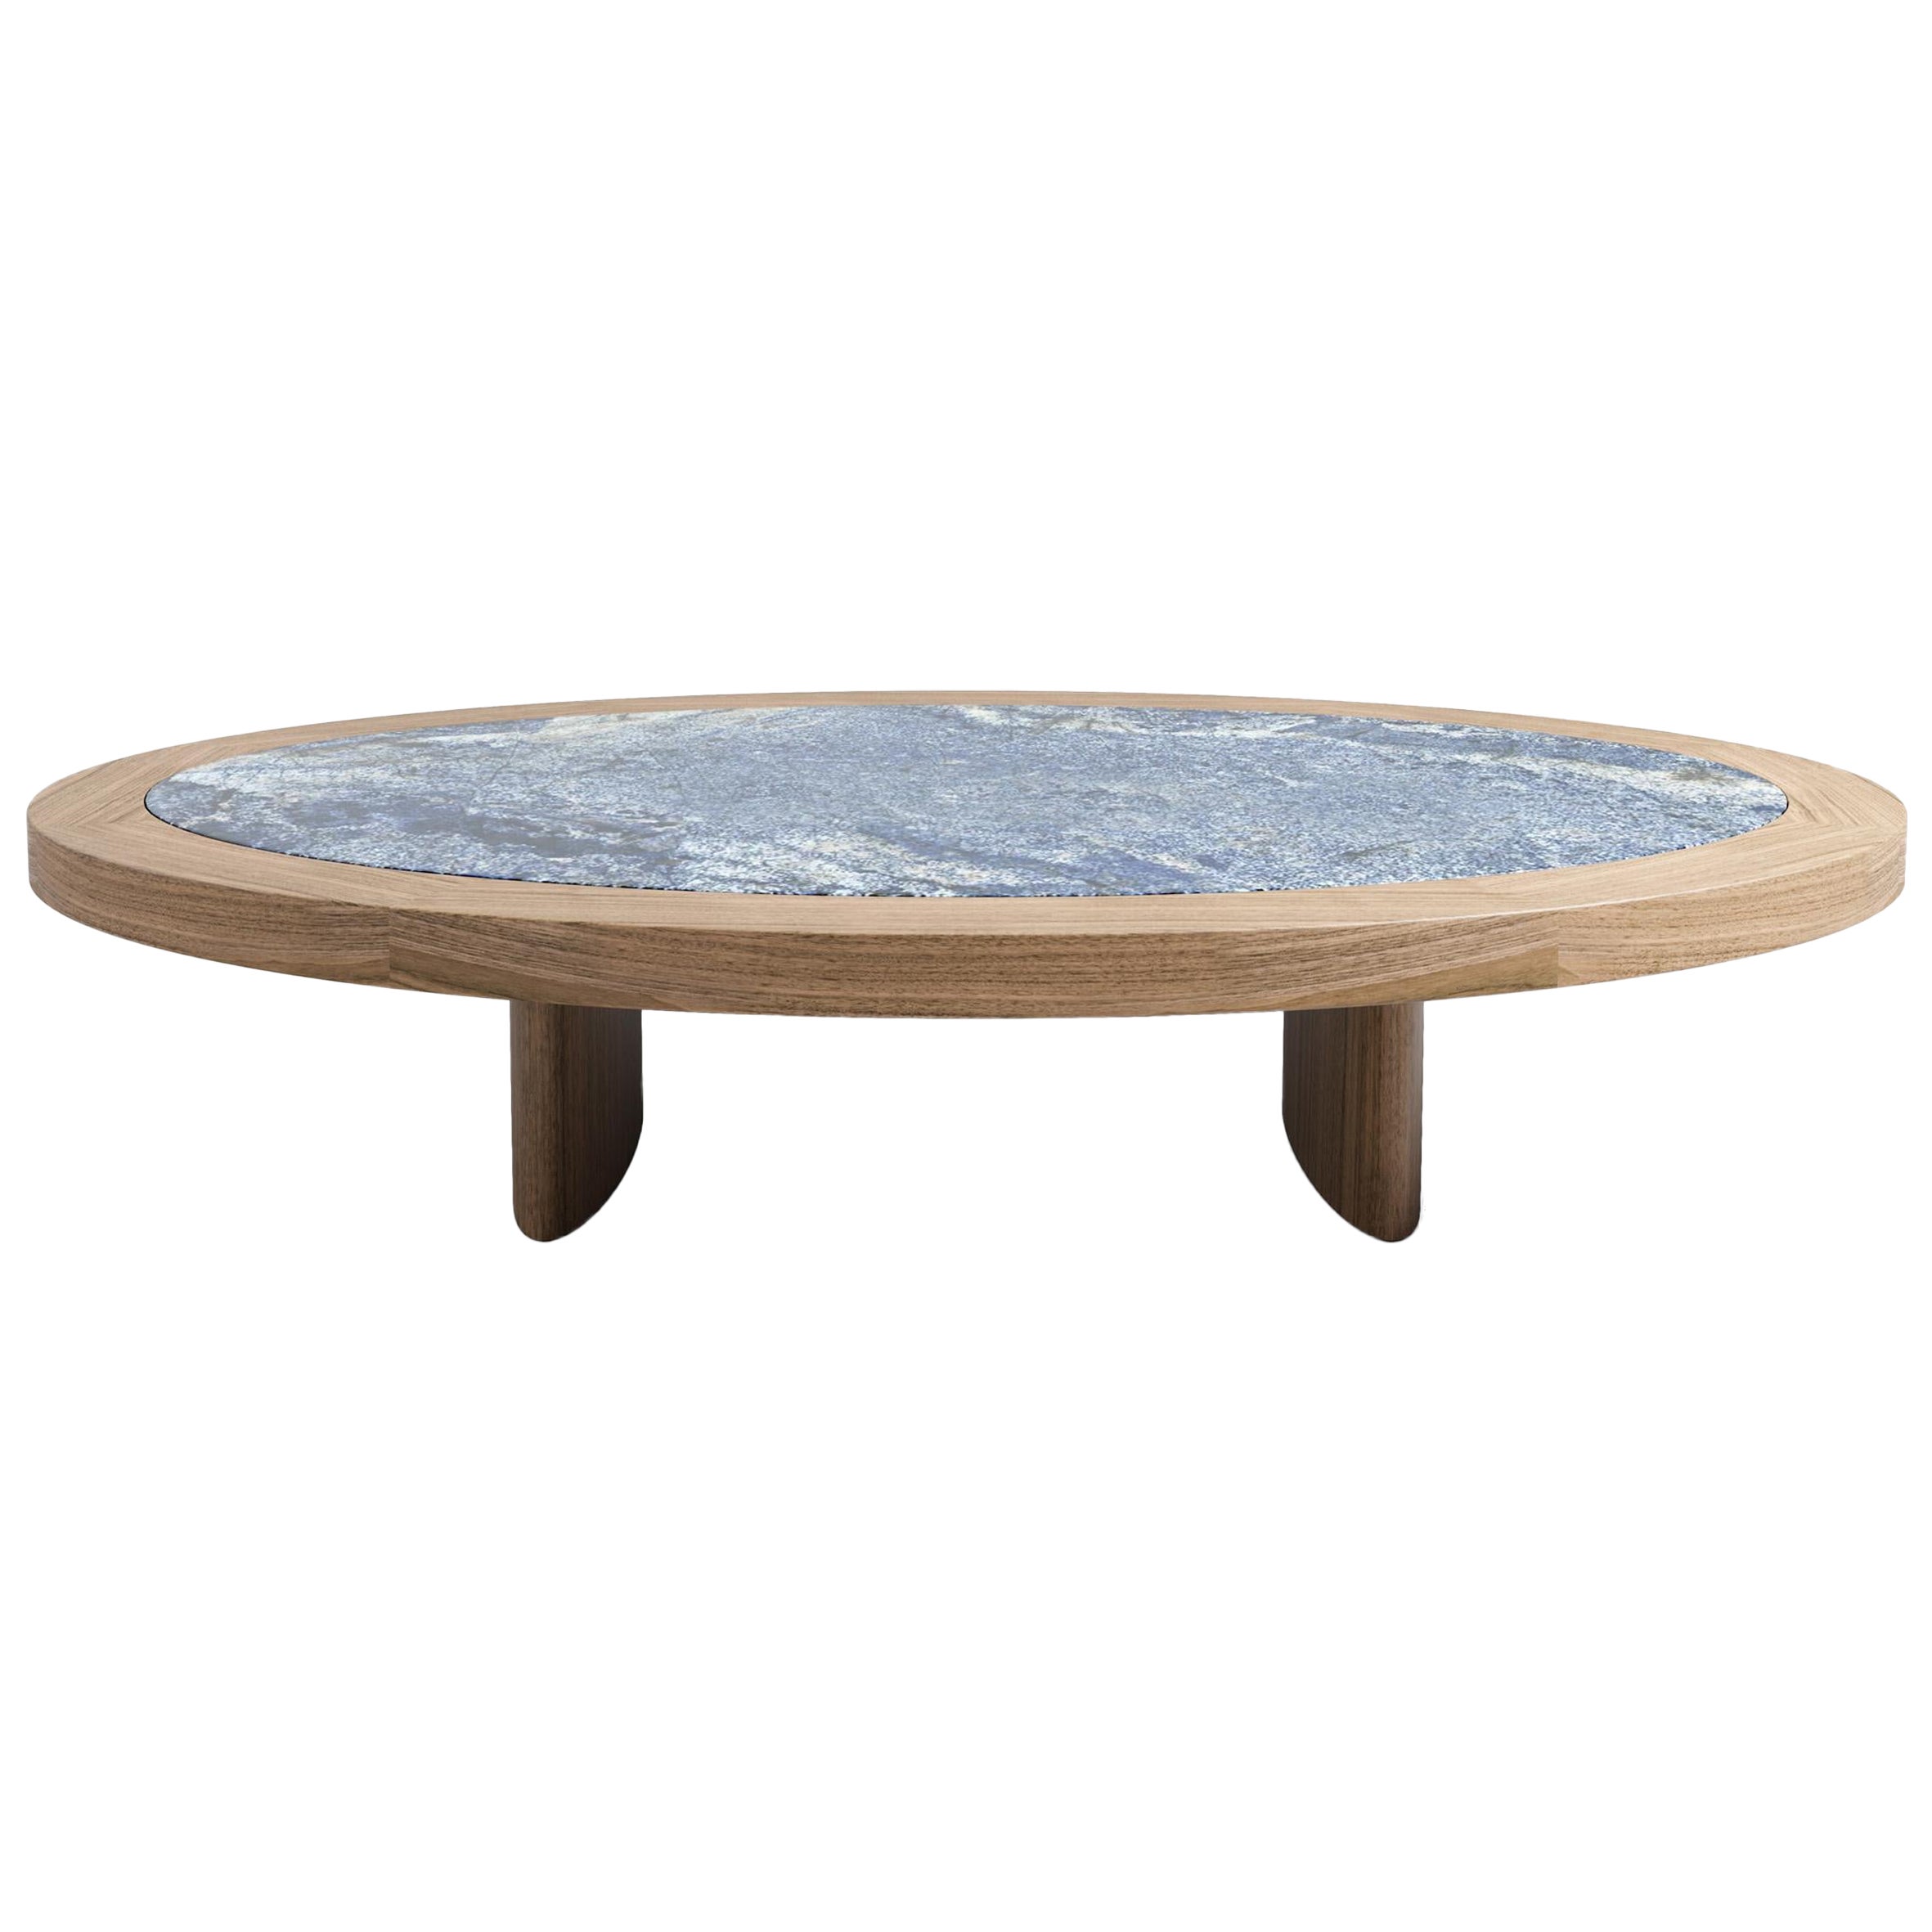 Limited Edition Table Monta in Wood and Blue Granite by Charlotte Perriand For Sale